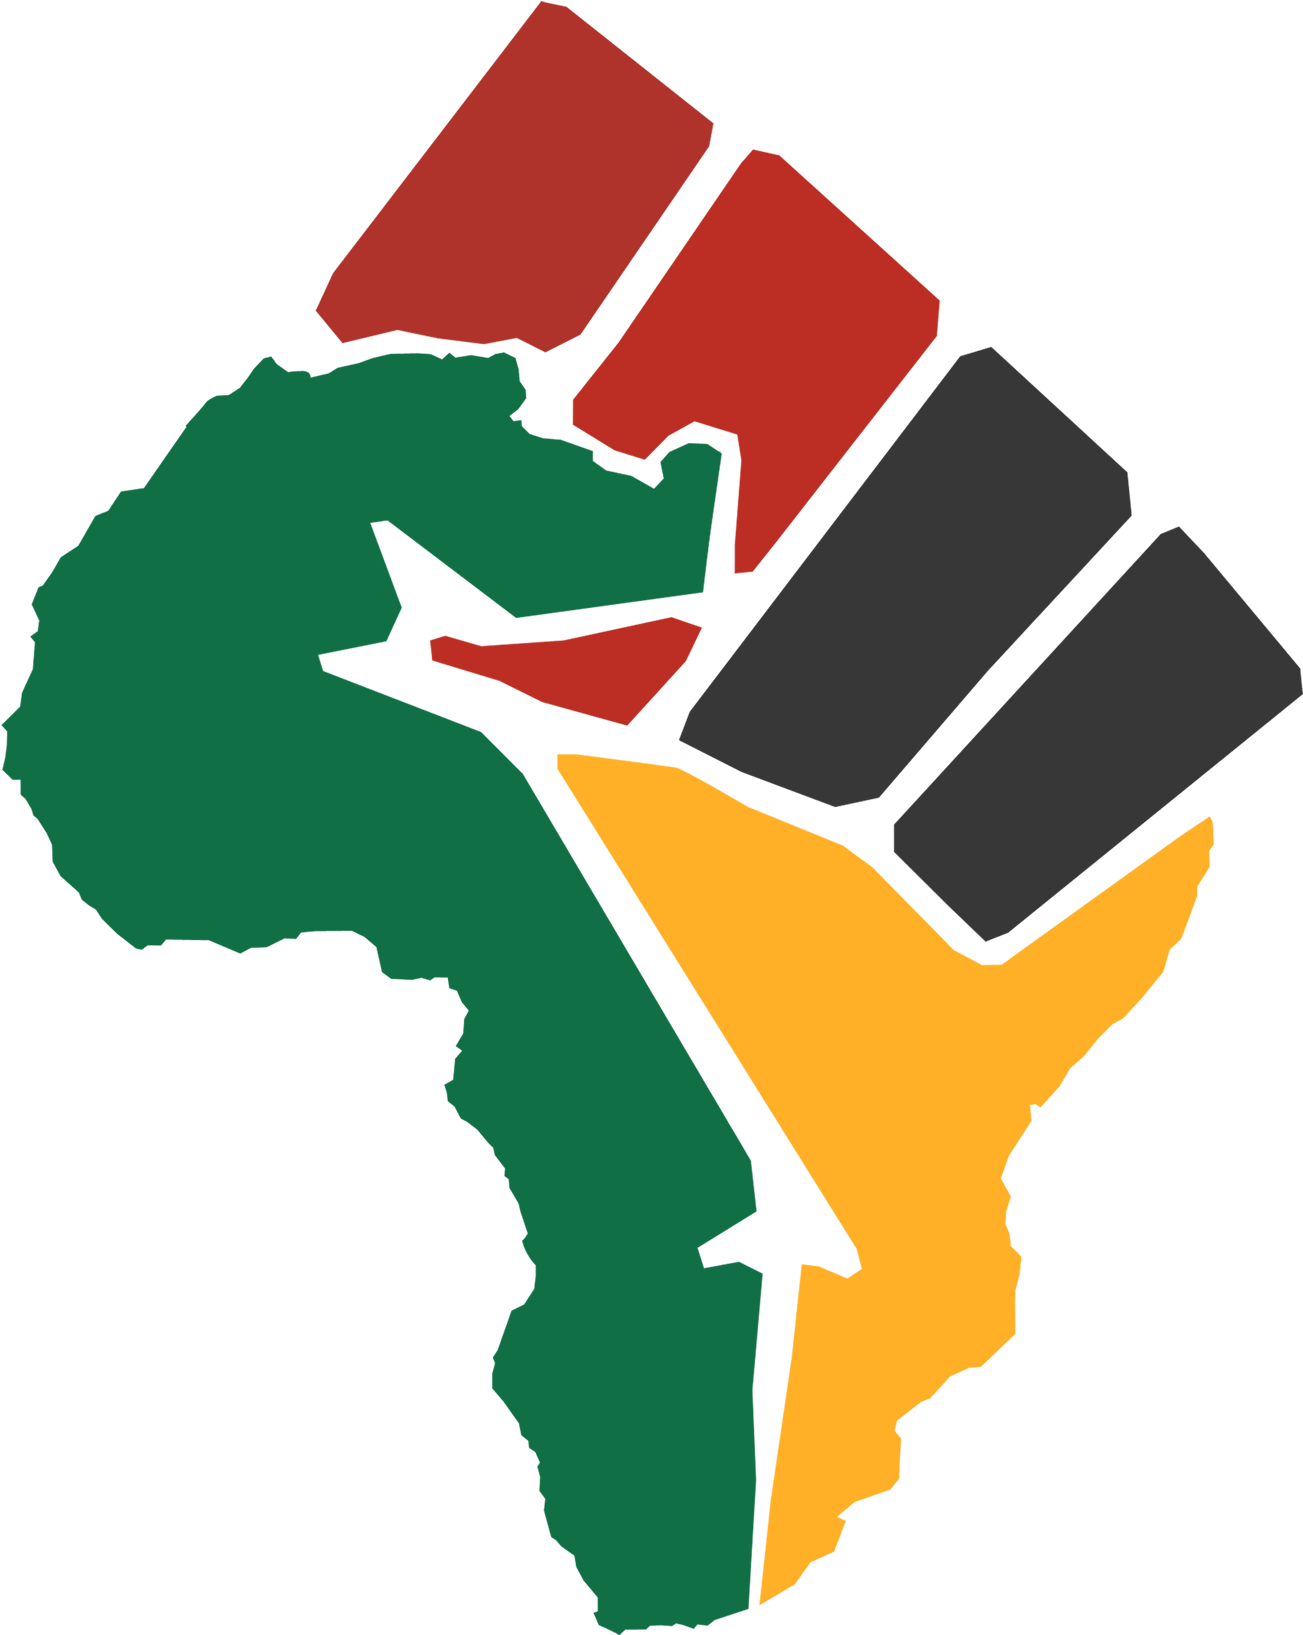 "we Know That As Individuals We Can Do Nothing - Black Panther Fist Symbol (1415x1752)